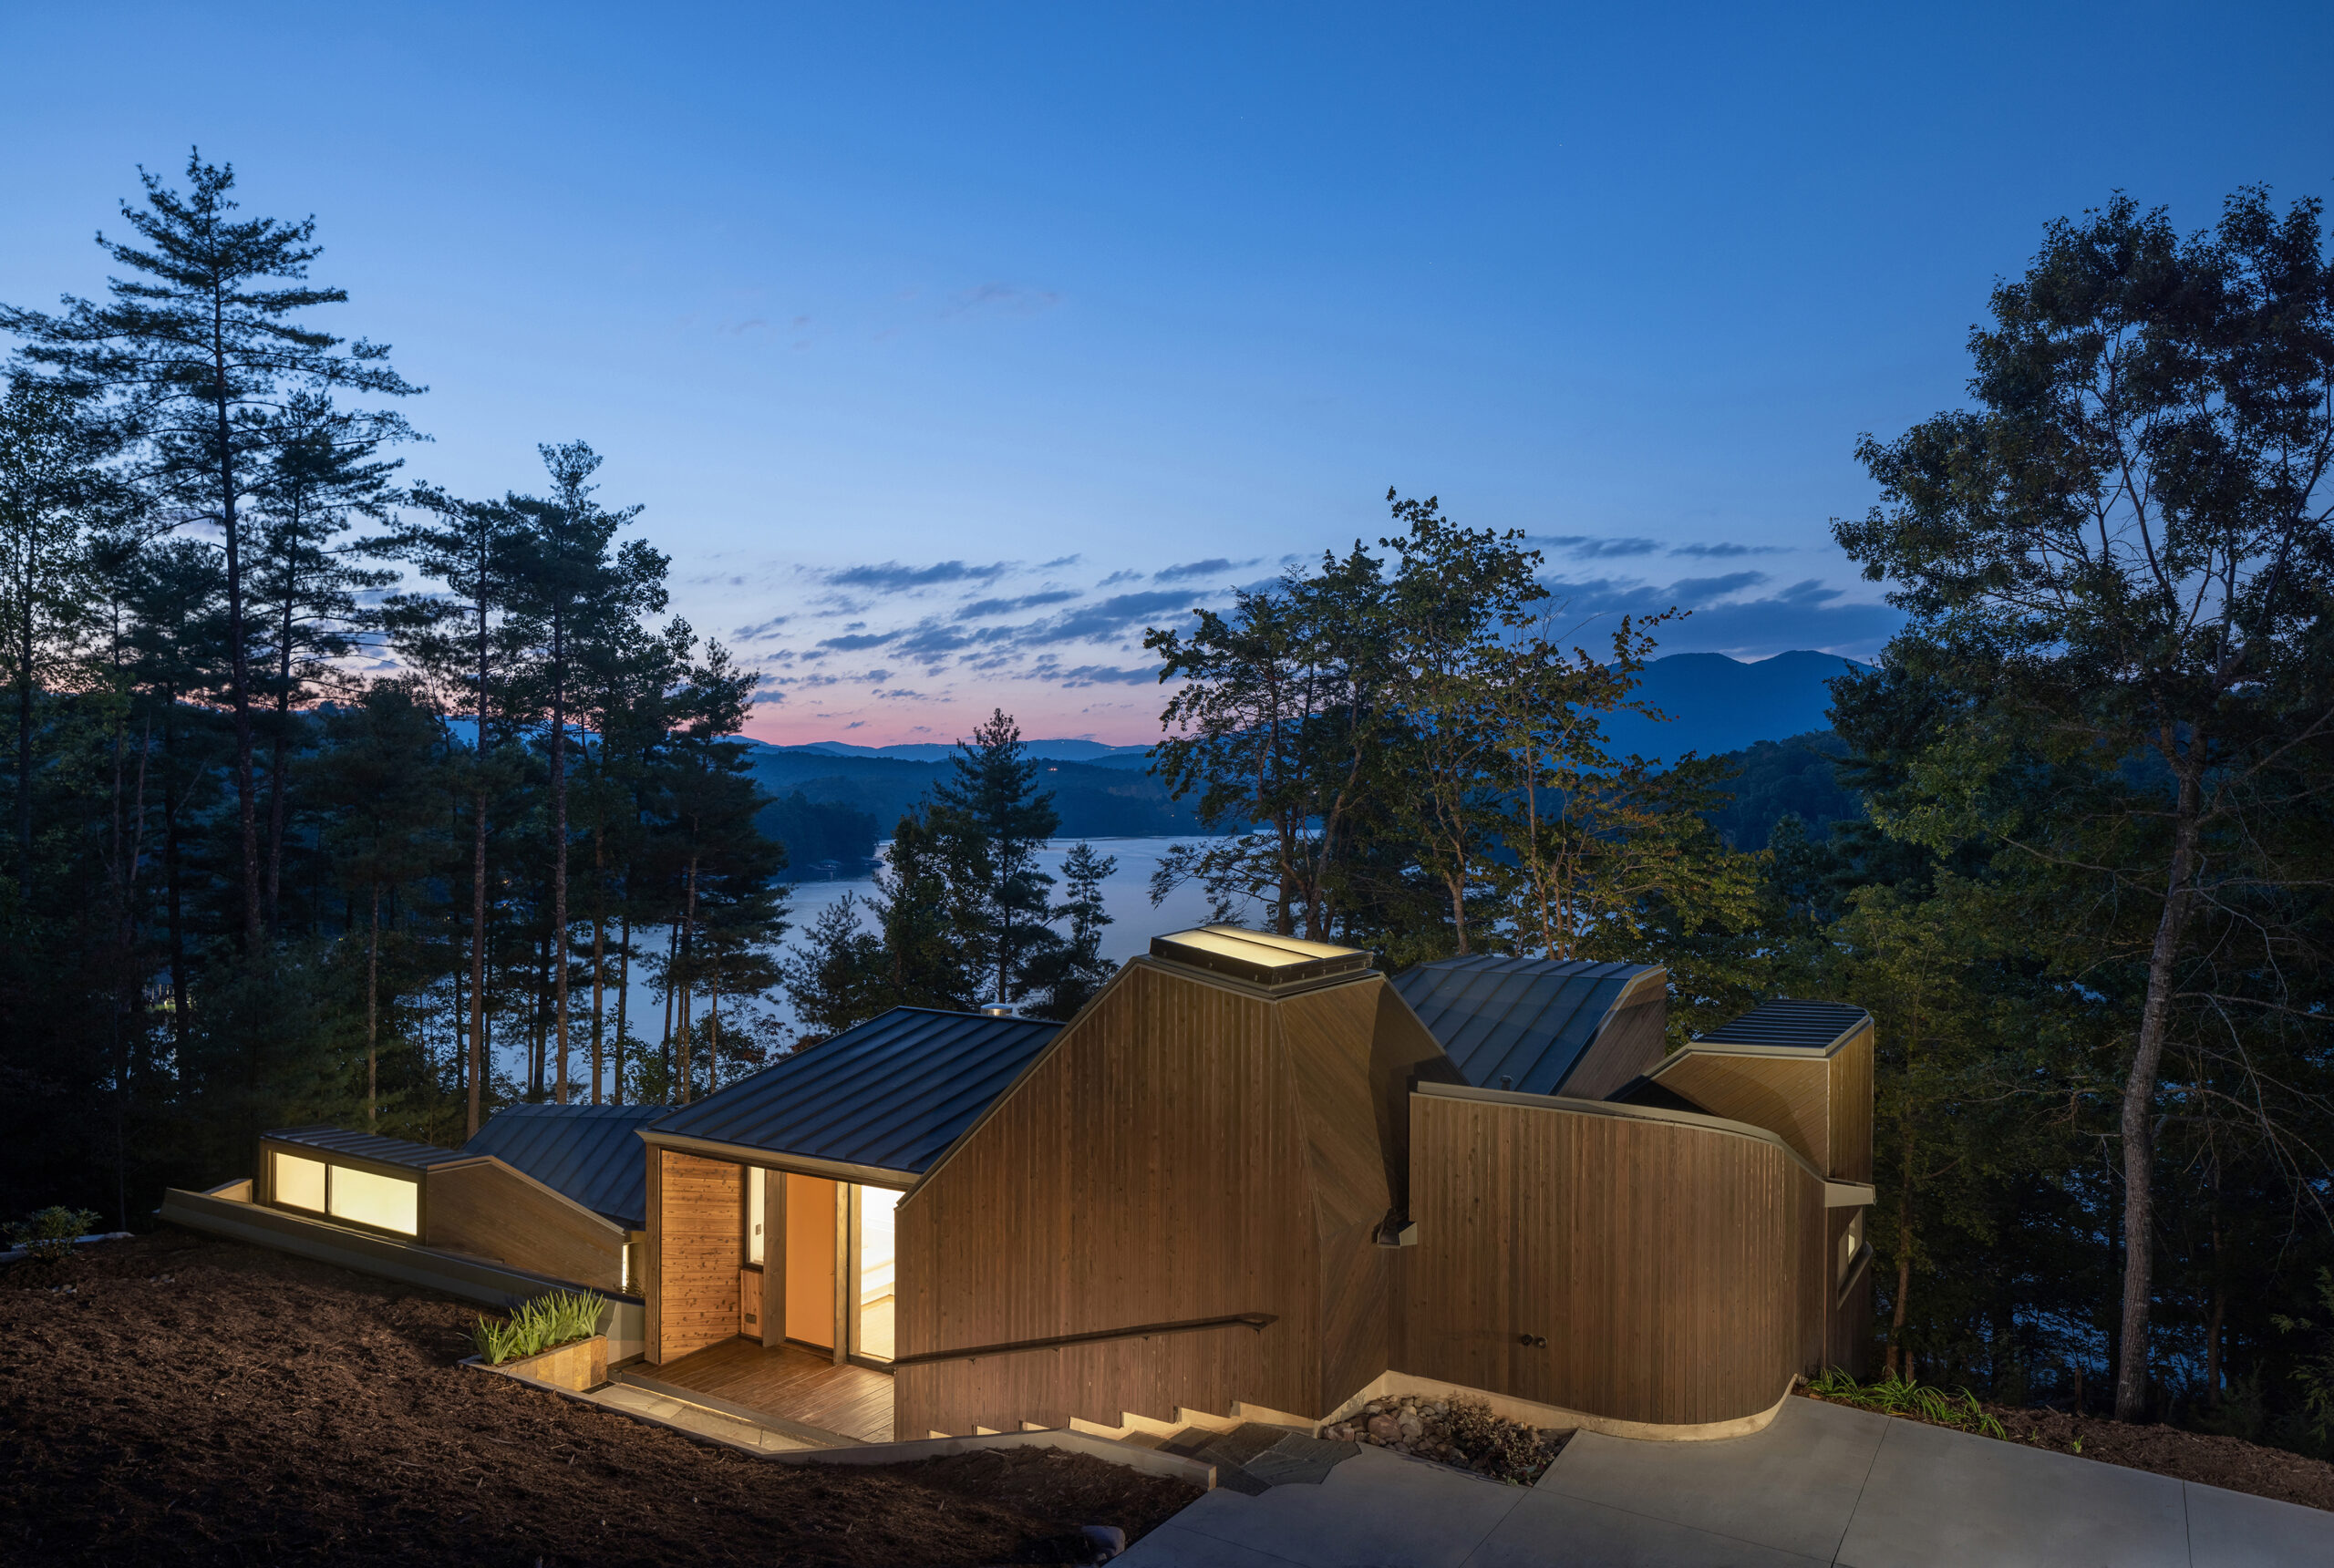 Fuller/Overby redefines the lakeside respite with a courtyard house in cabin country